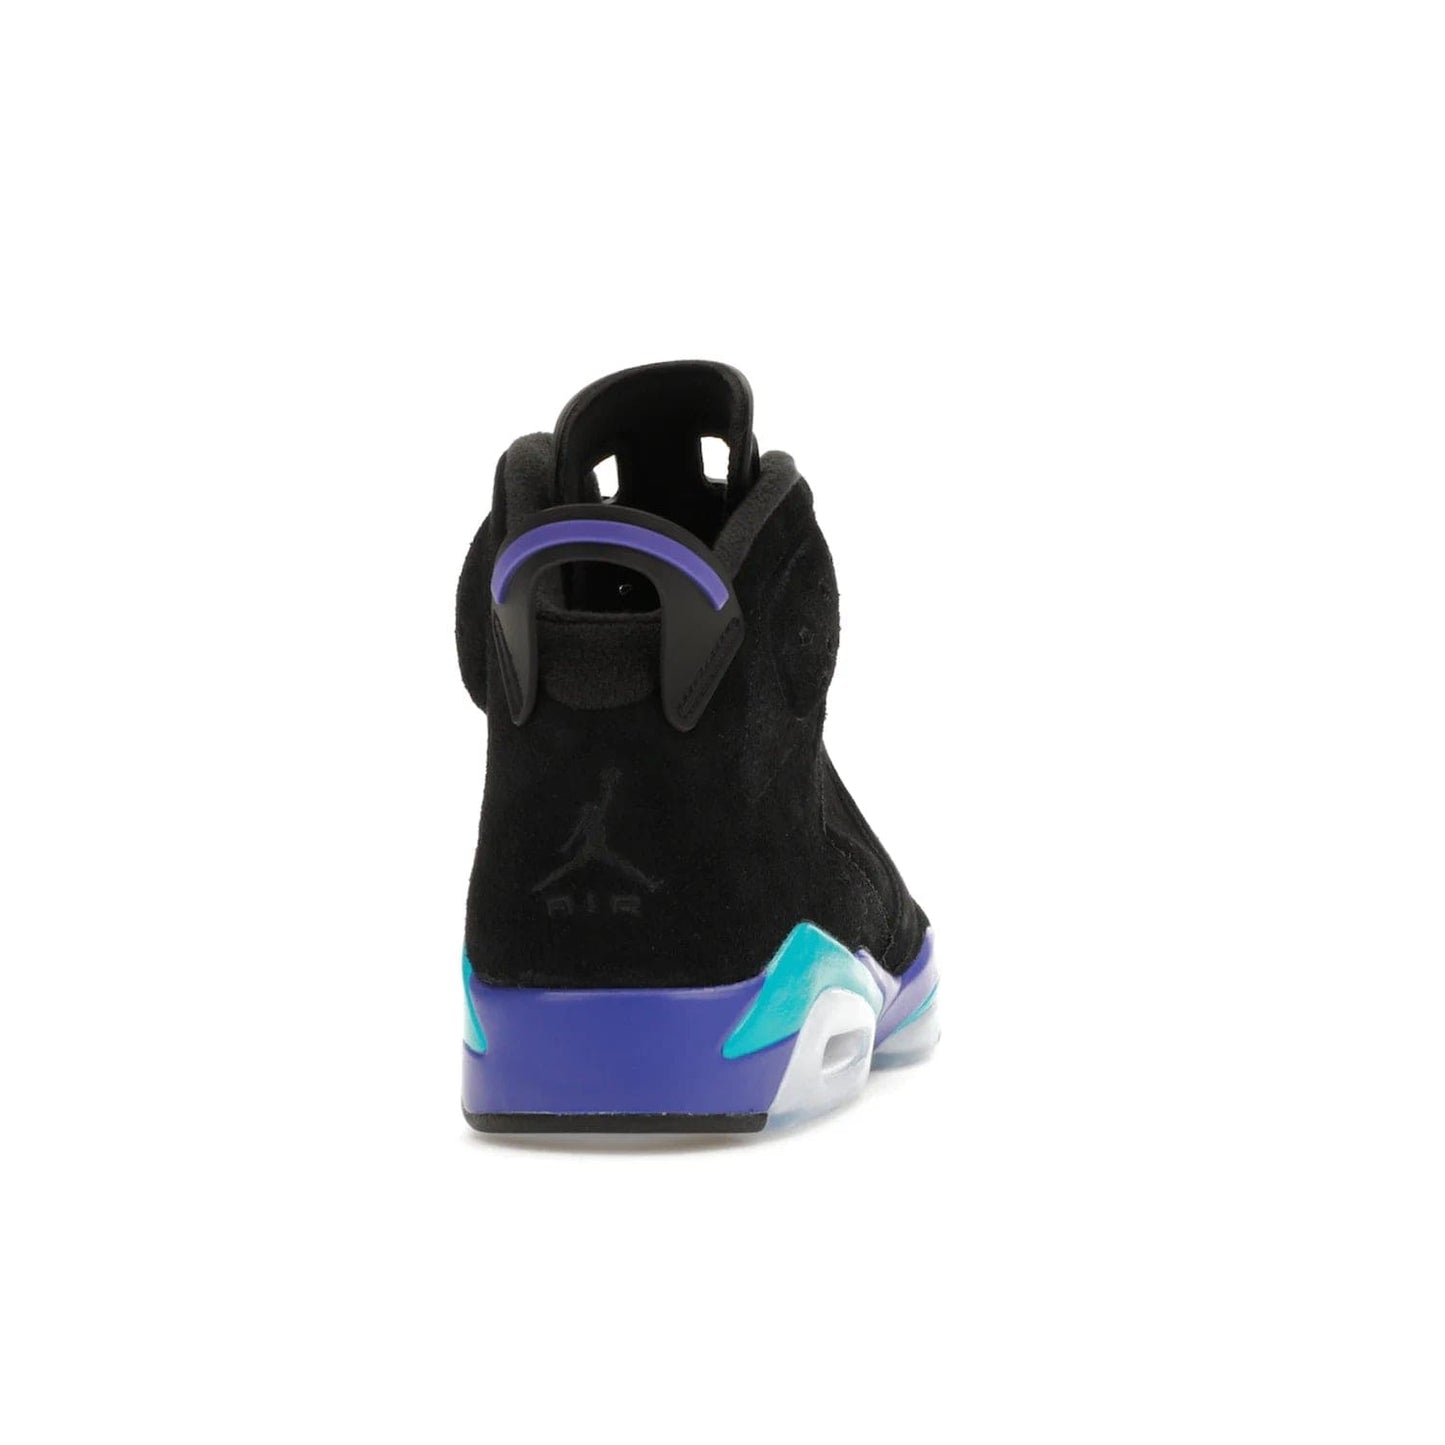 Jordan 6 Retro Aqua - Image 29 - Only at www.BallersClubKickz.com - Feel the classic Jordan 6 Retro Aqua paired with modern style. Black, Bright Concord, and Aquatone hues are crafted with a supple suede and rubberized heel tab. This standout sneaker adds signature Jordan elements at $200. Elevate your style with the Jordan 6 Retro Aqua.